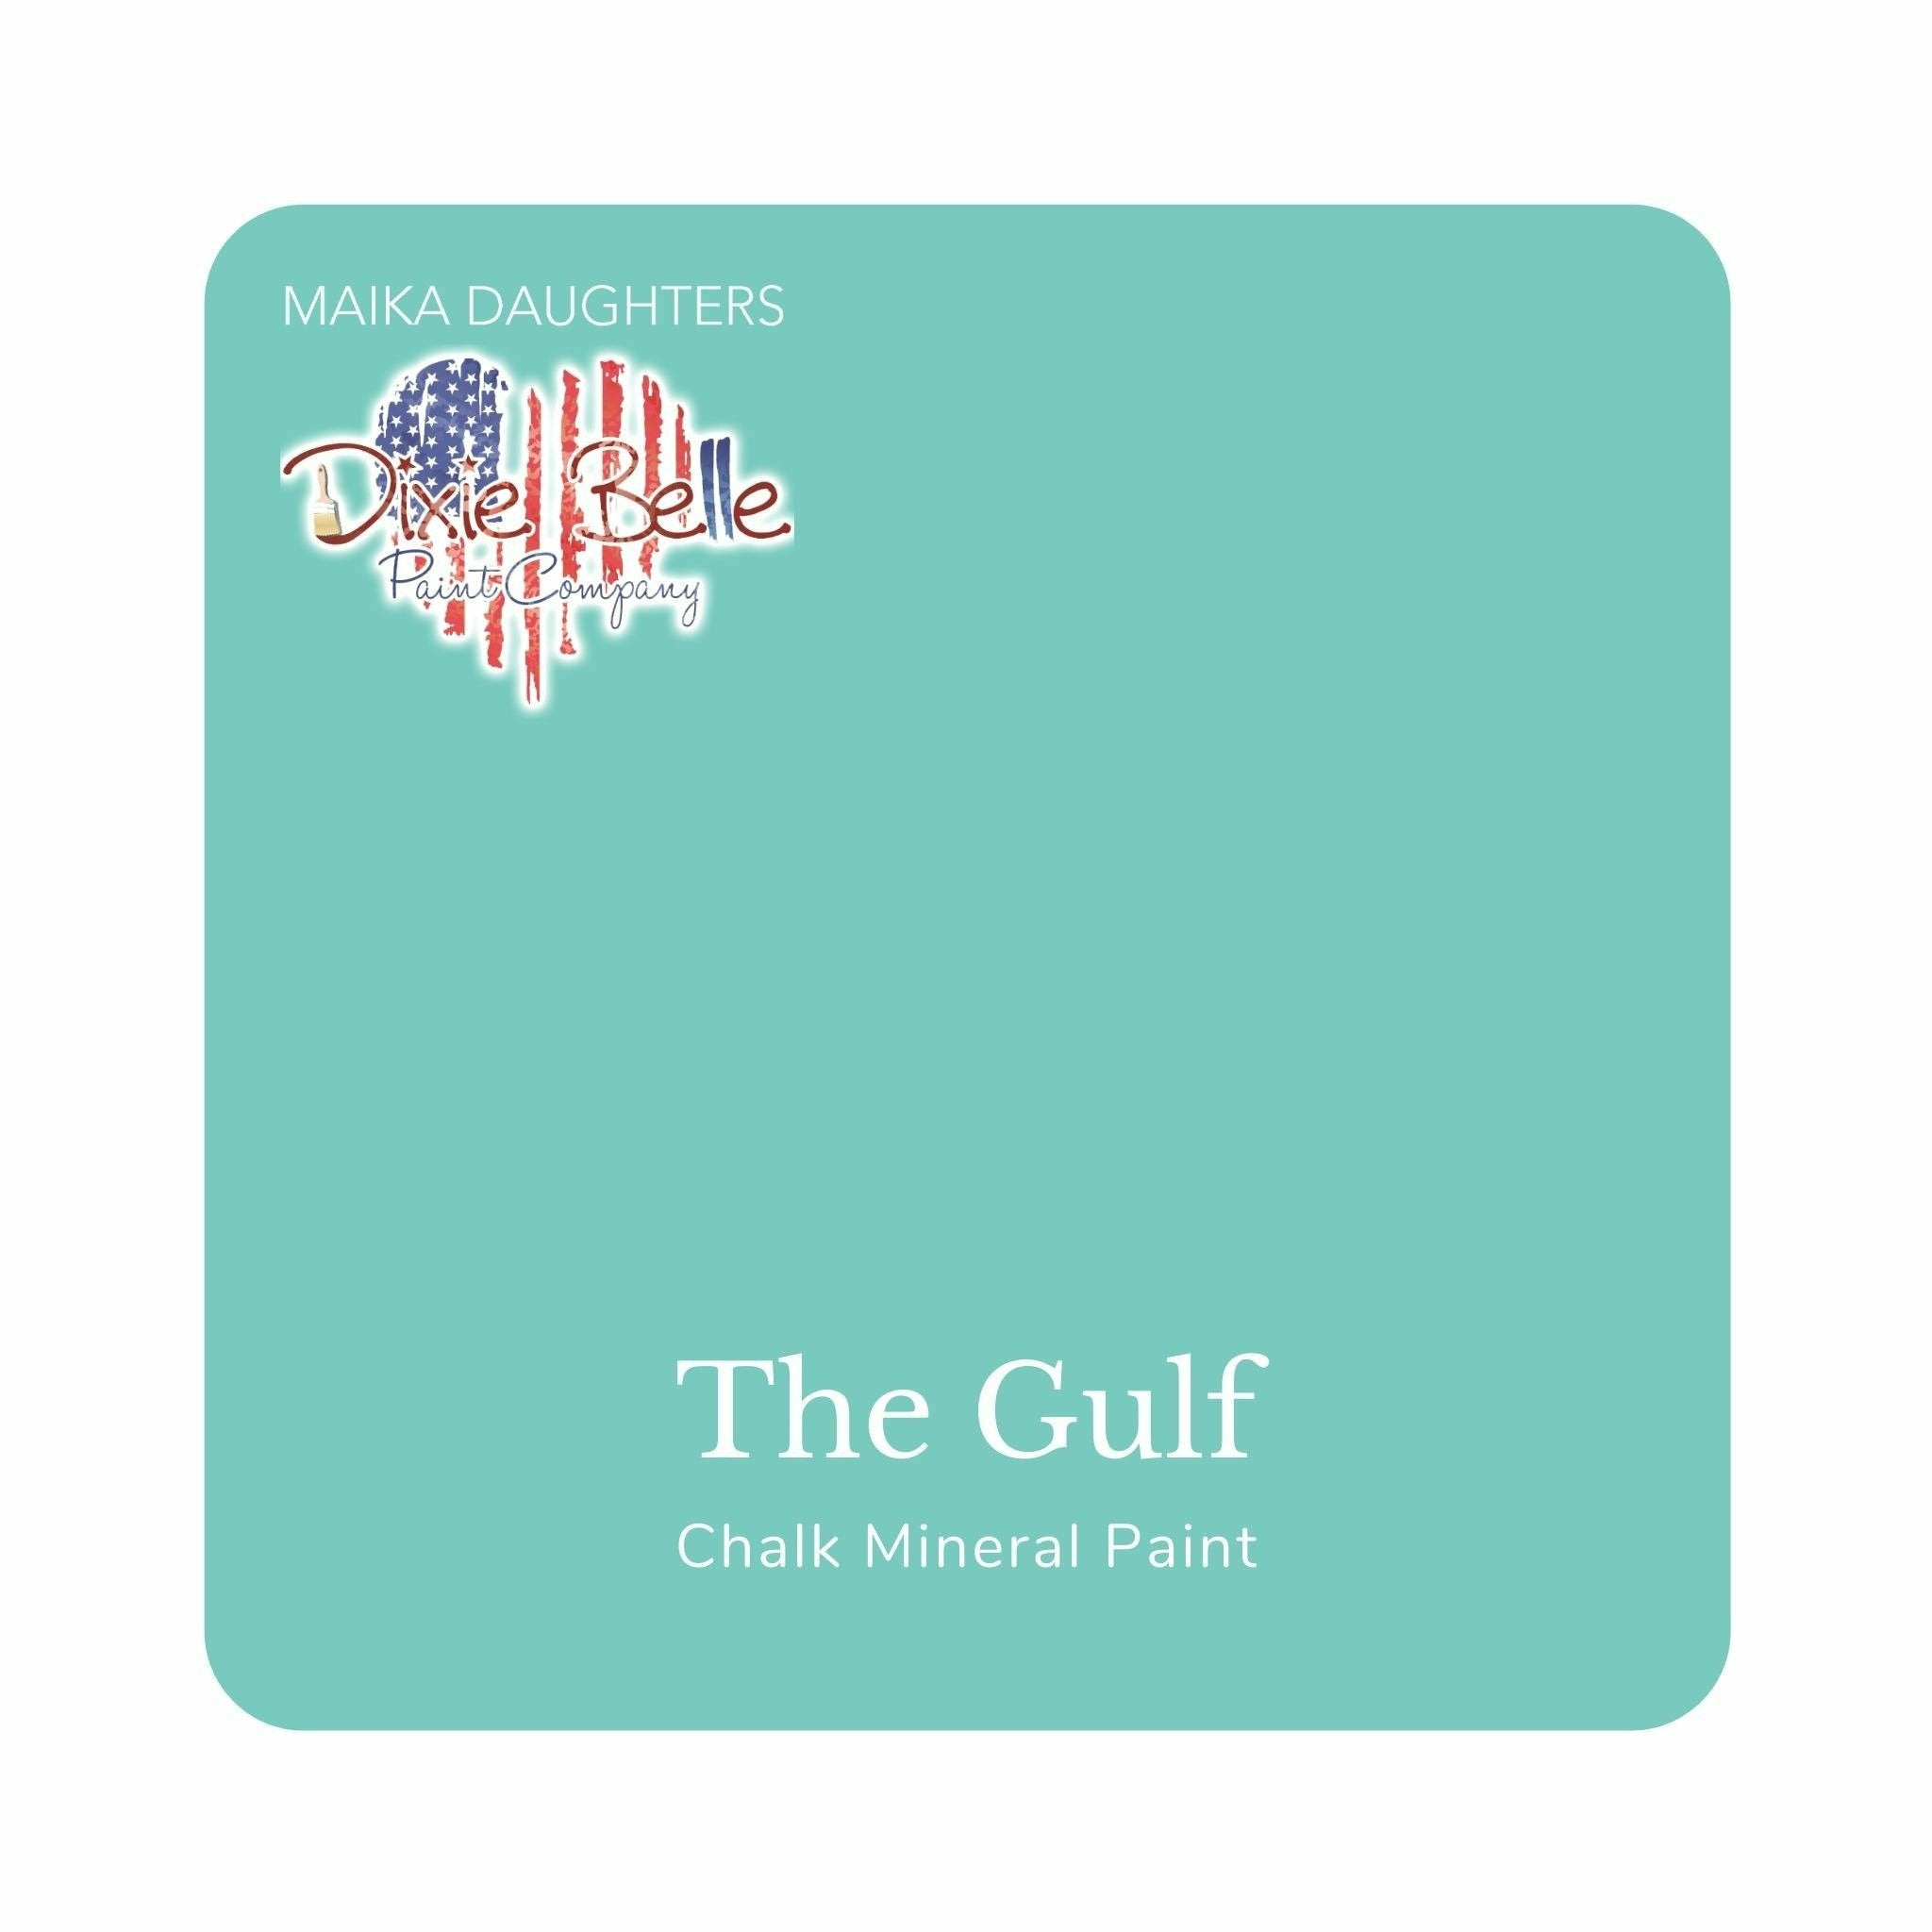 A square swatch card of Dixie Belle Paint Company’s The Gulf Chalk Mineral Paint is against a white background. This color is a serene turquoise.